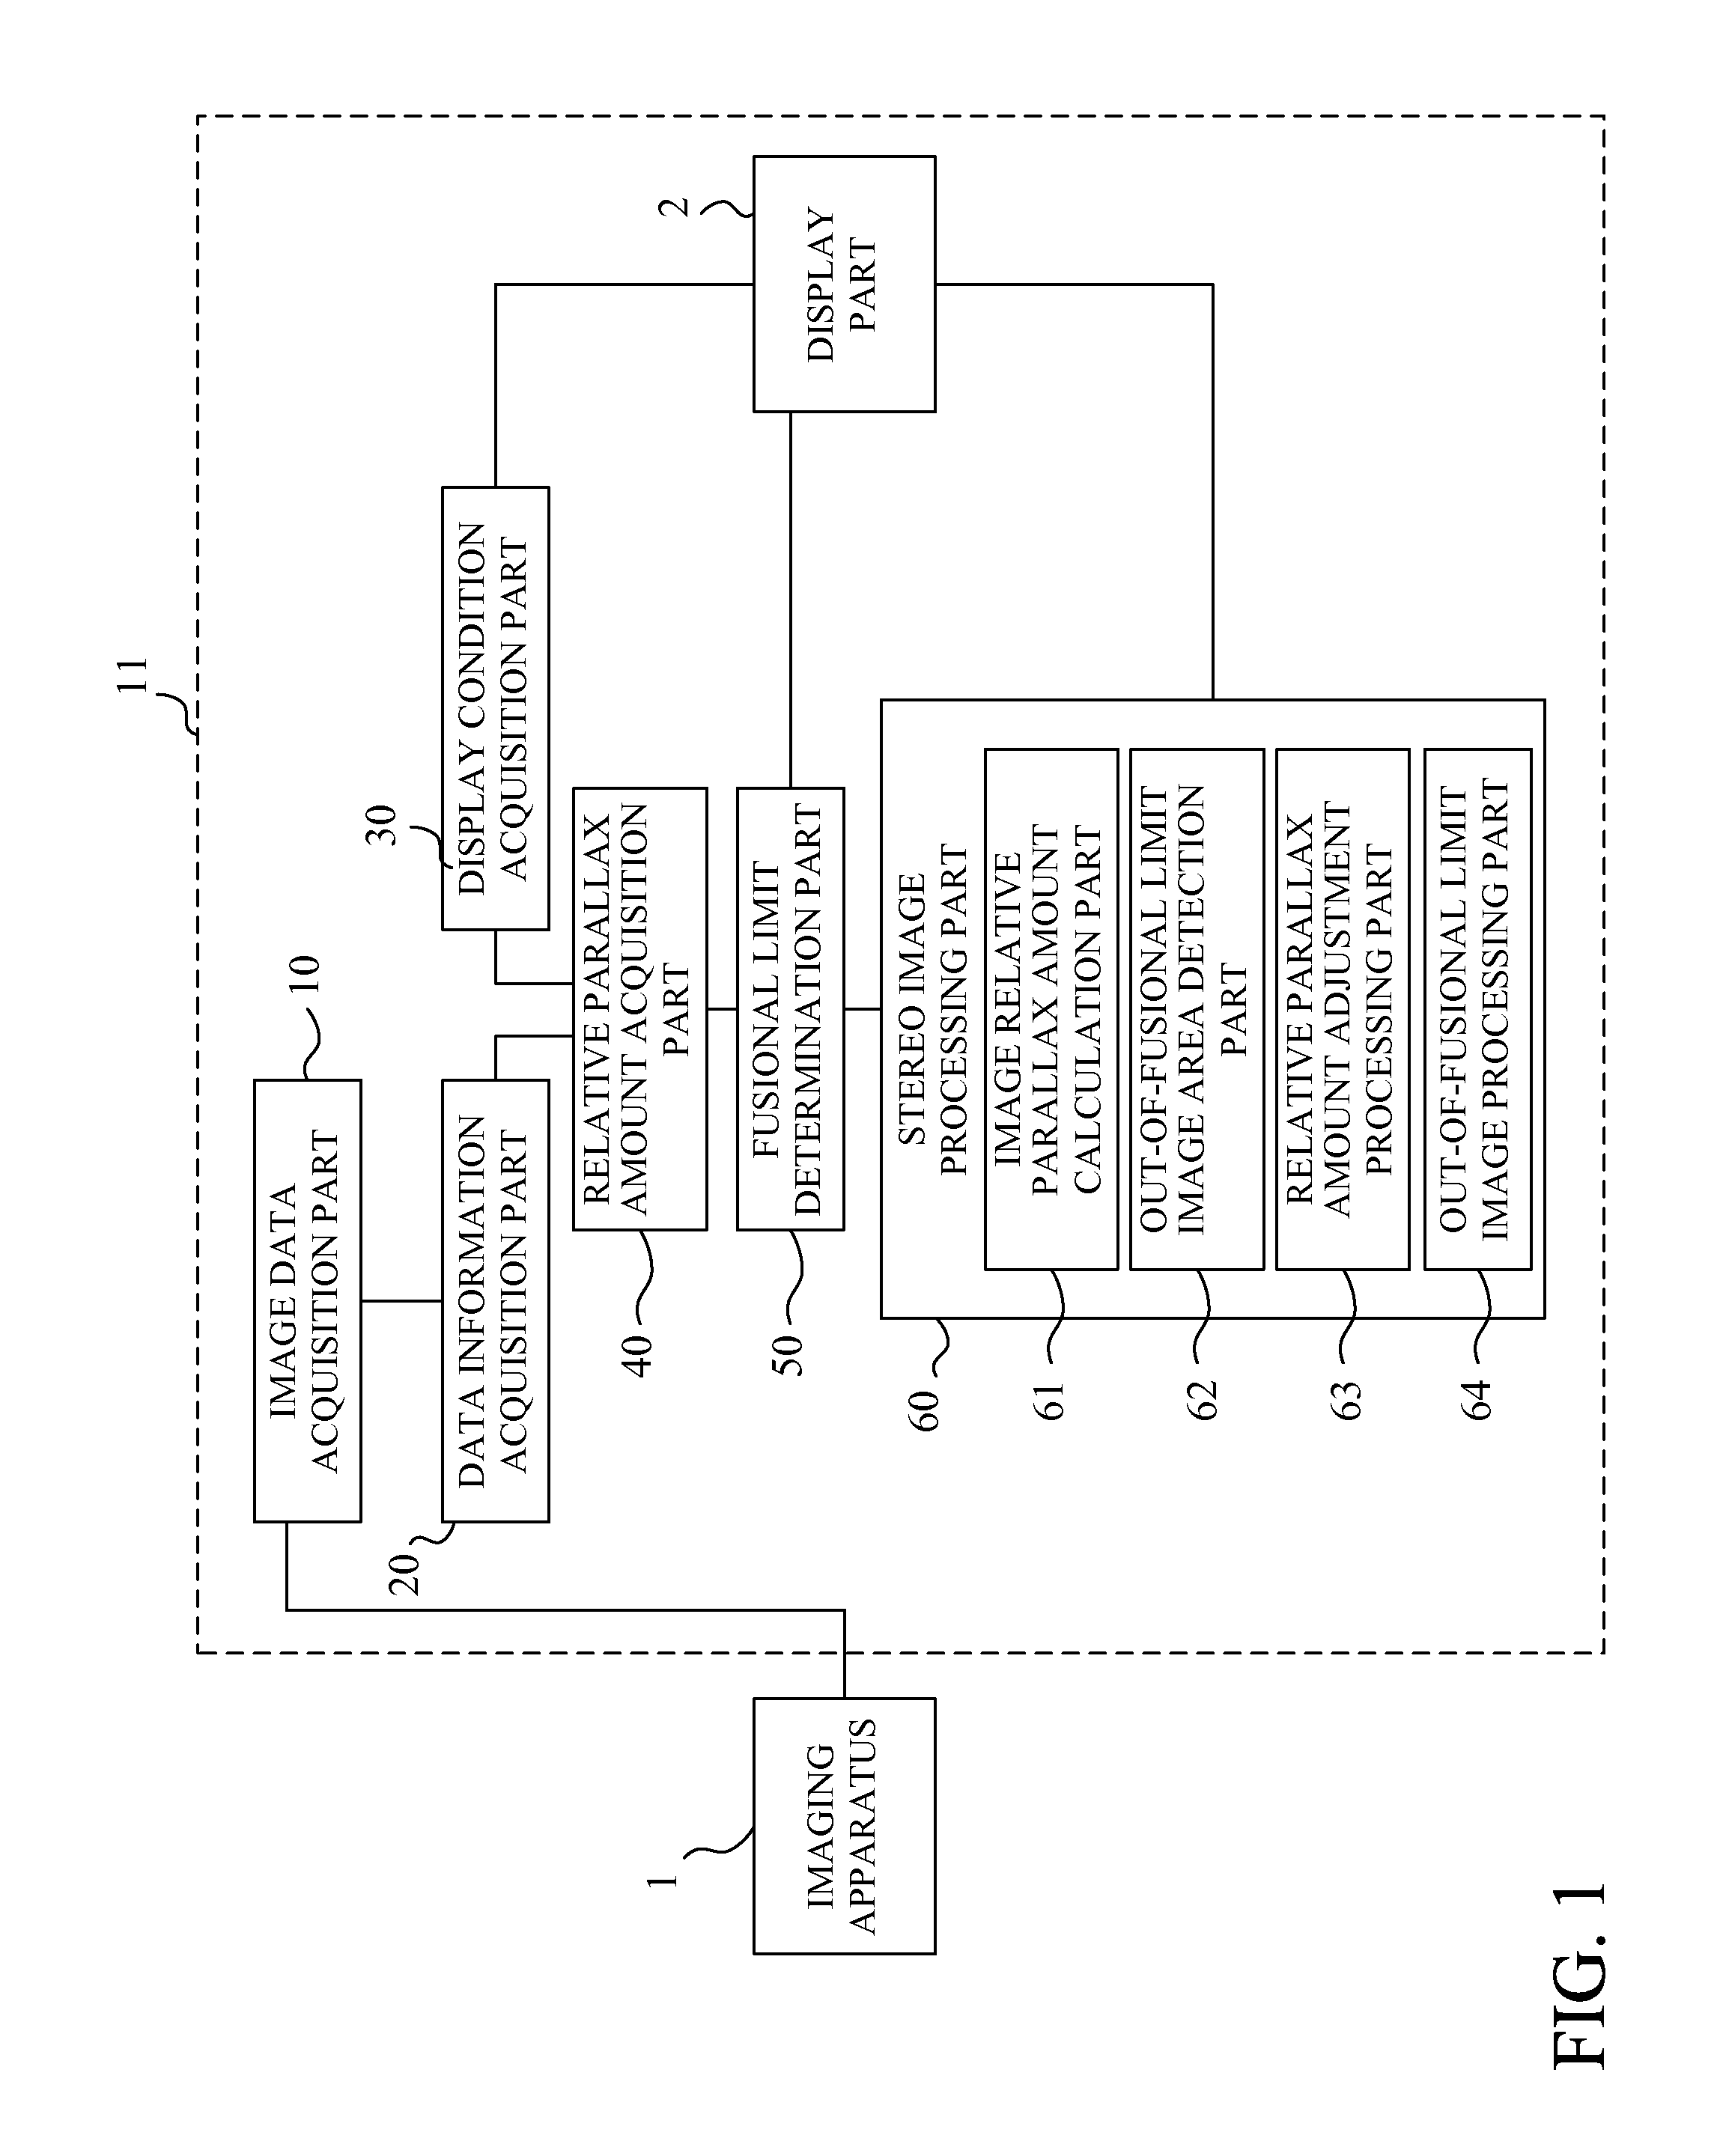 Stereo image display system, stereo imaging apparatus and stereo display apparatus